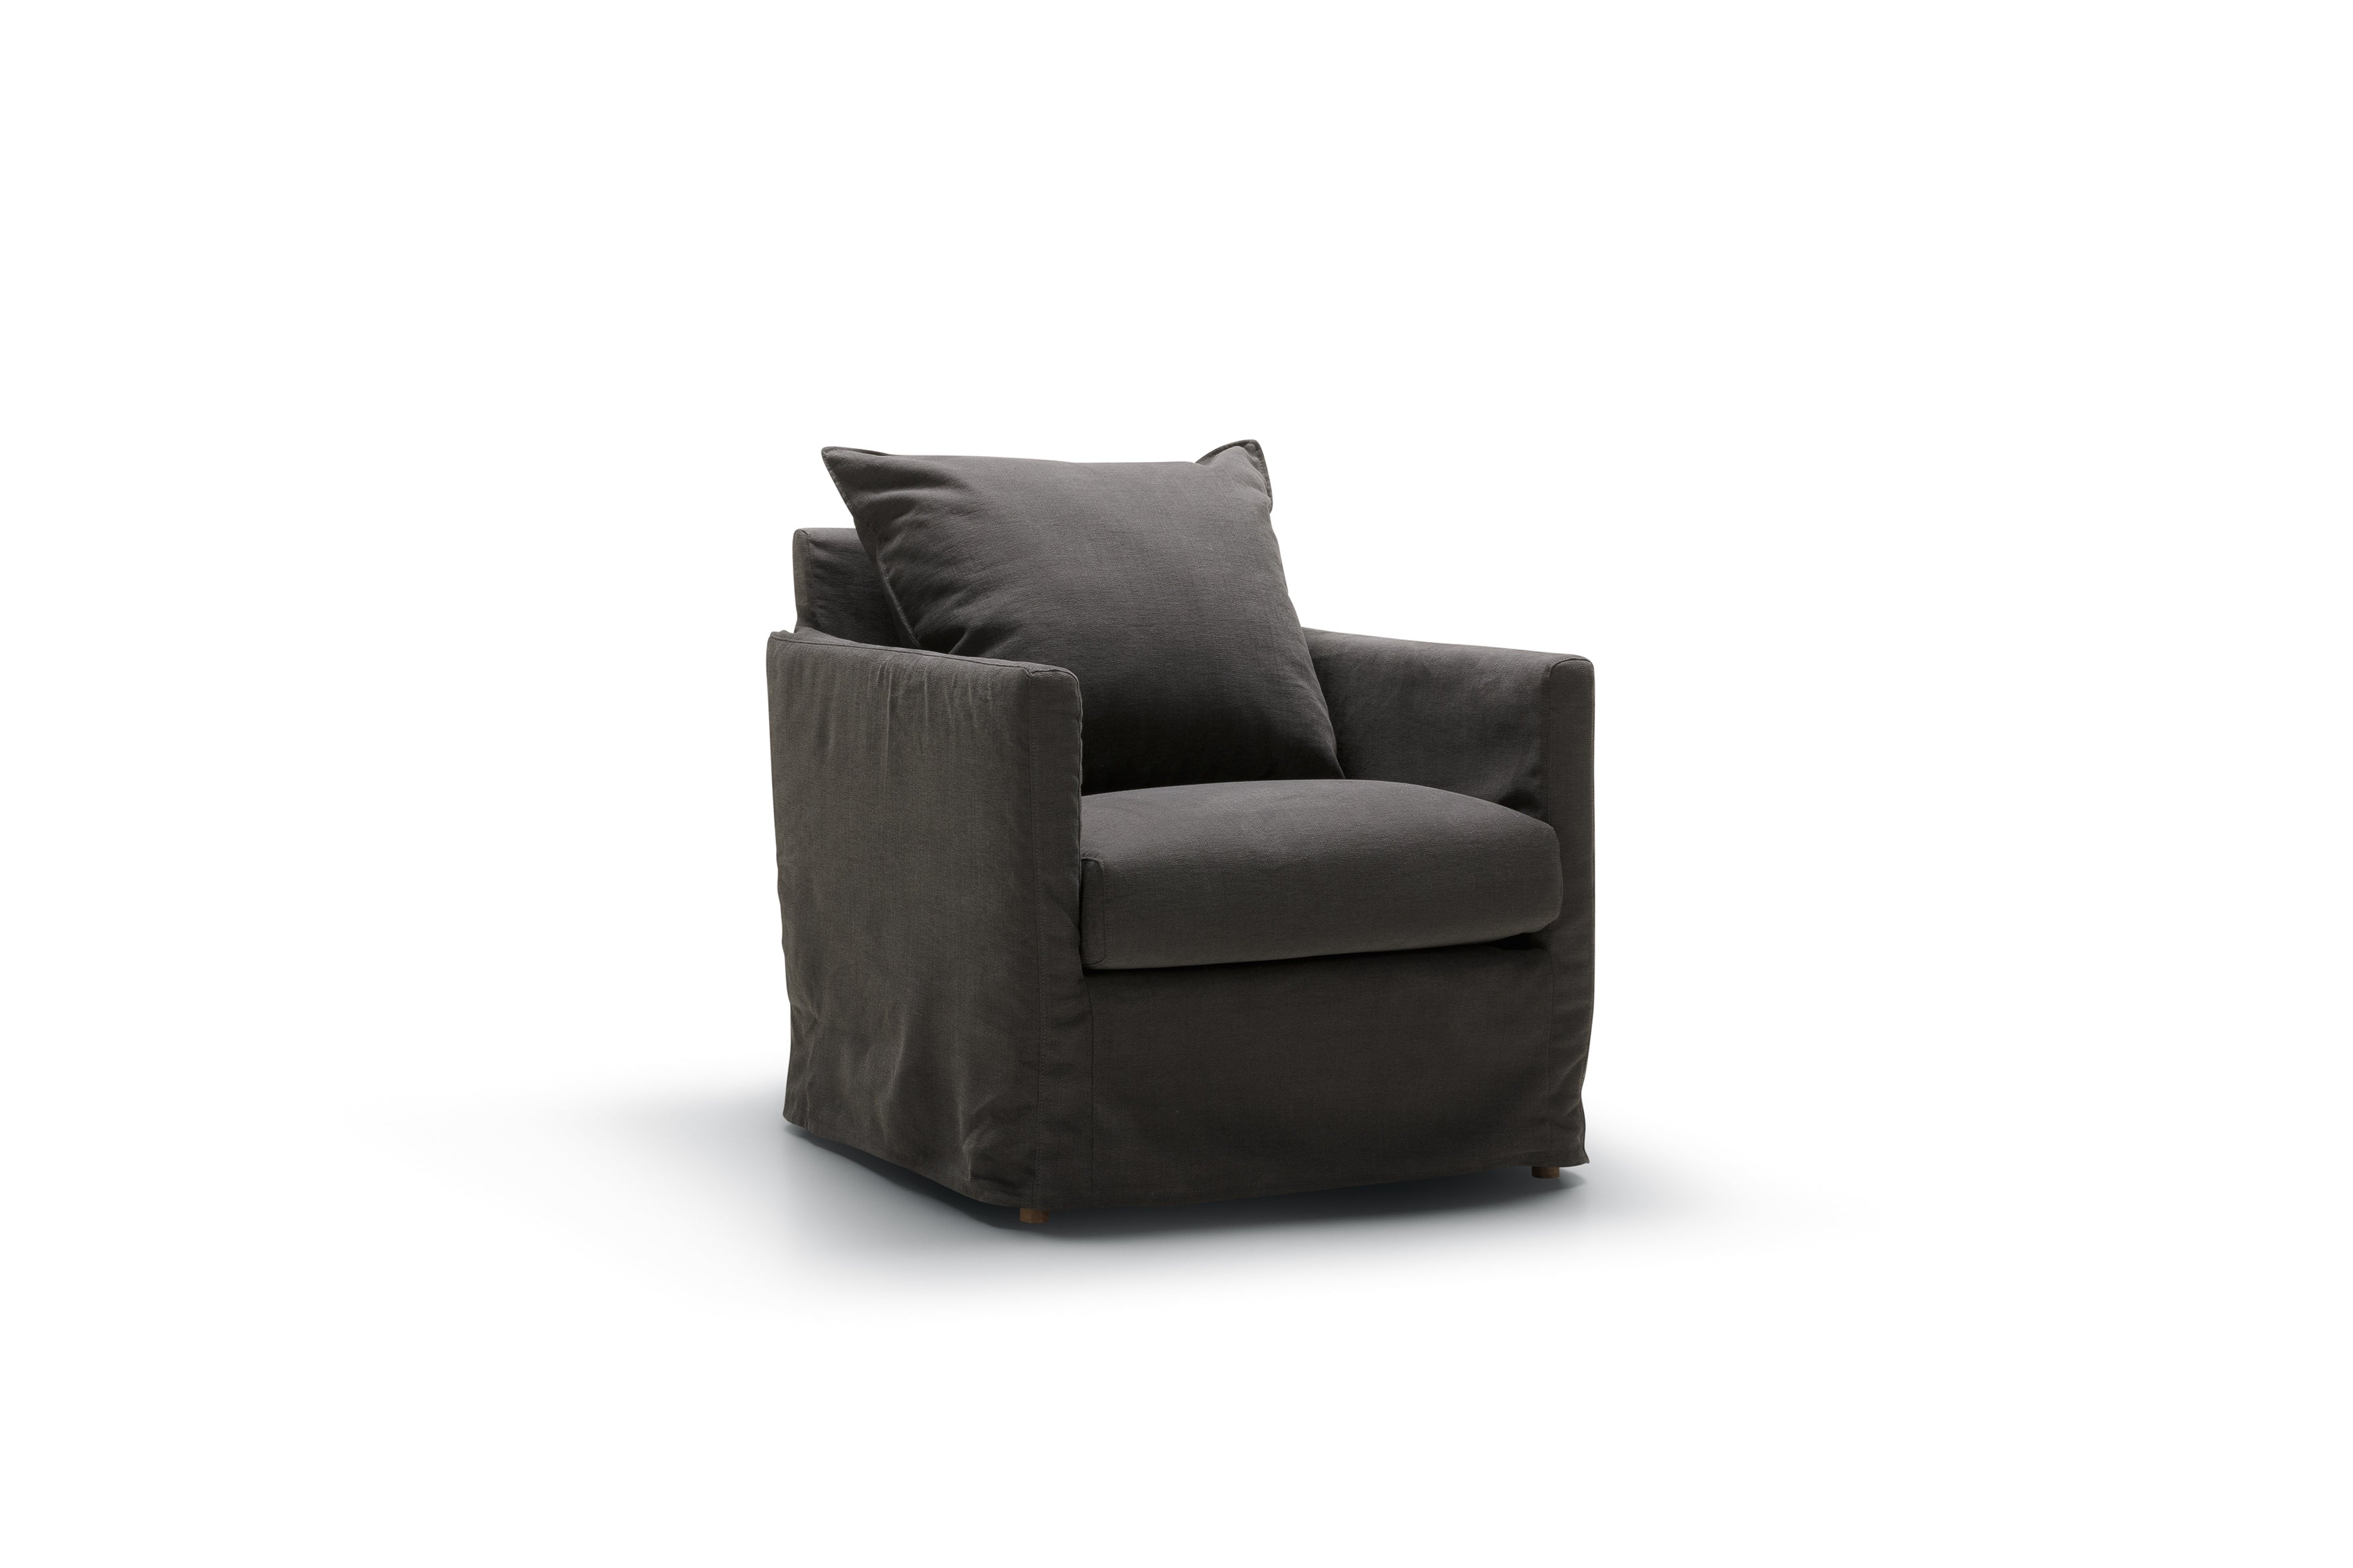 Mastrella Sia Armchair with Loose Cover